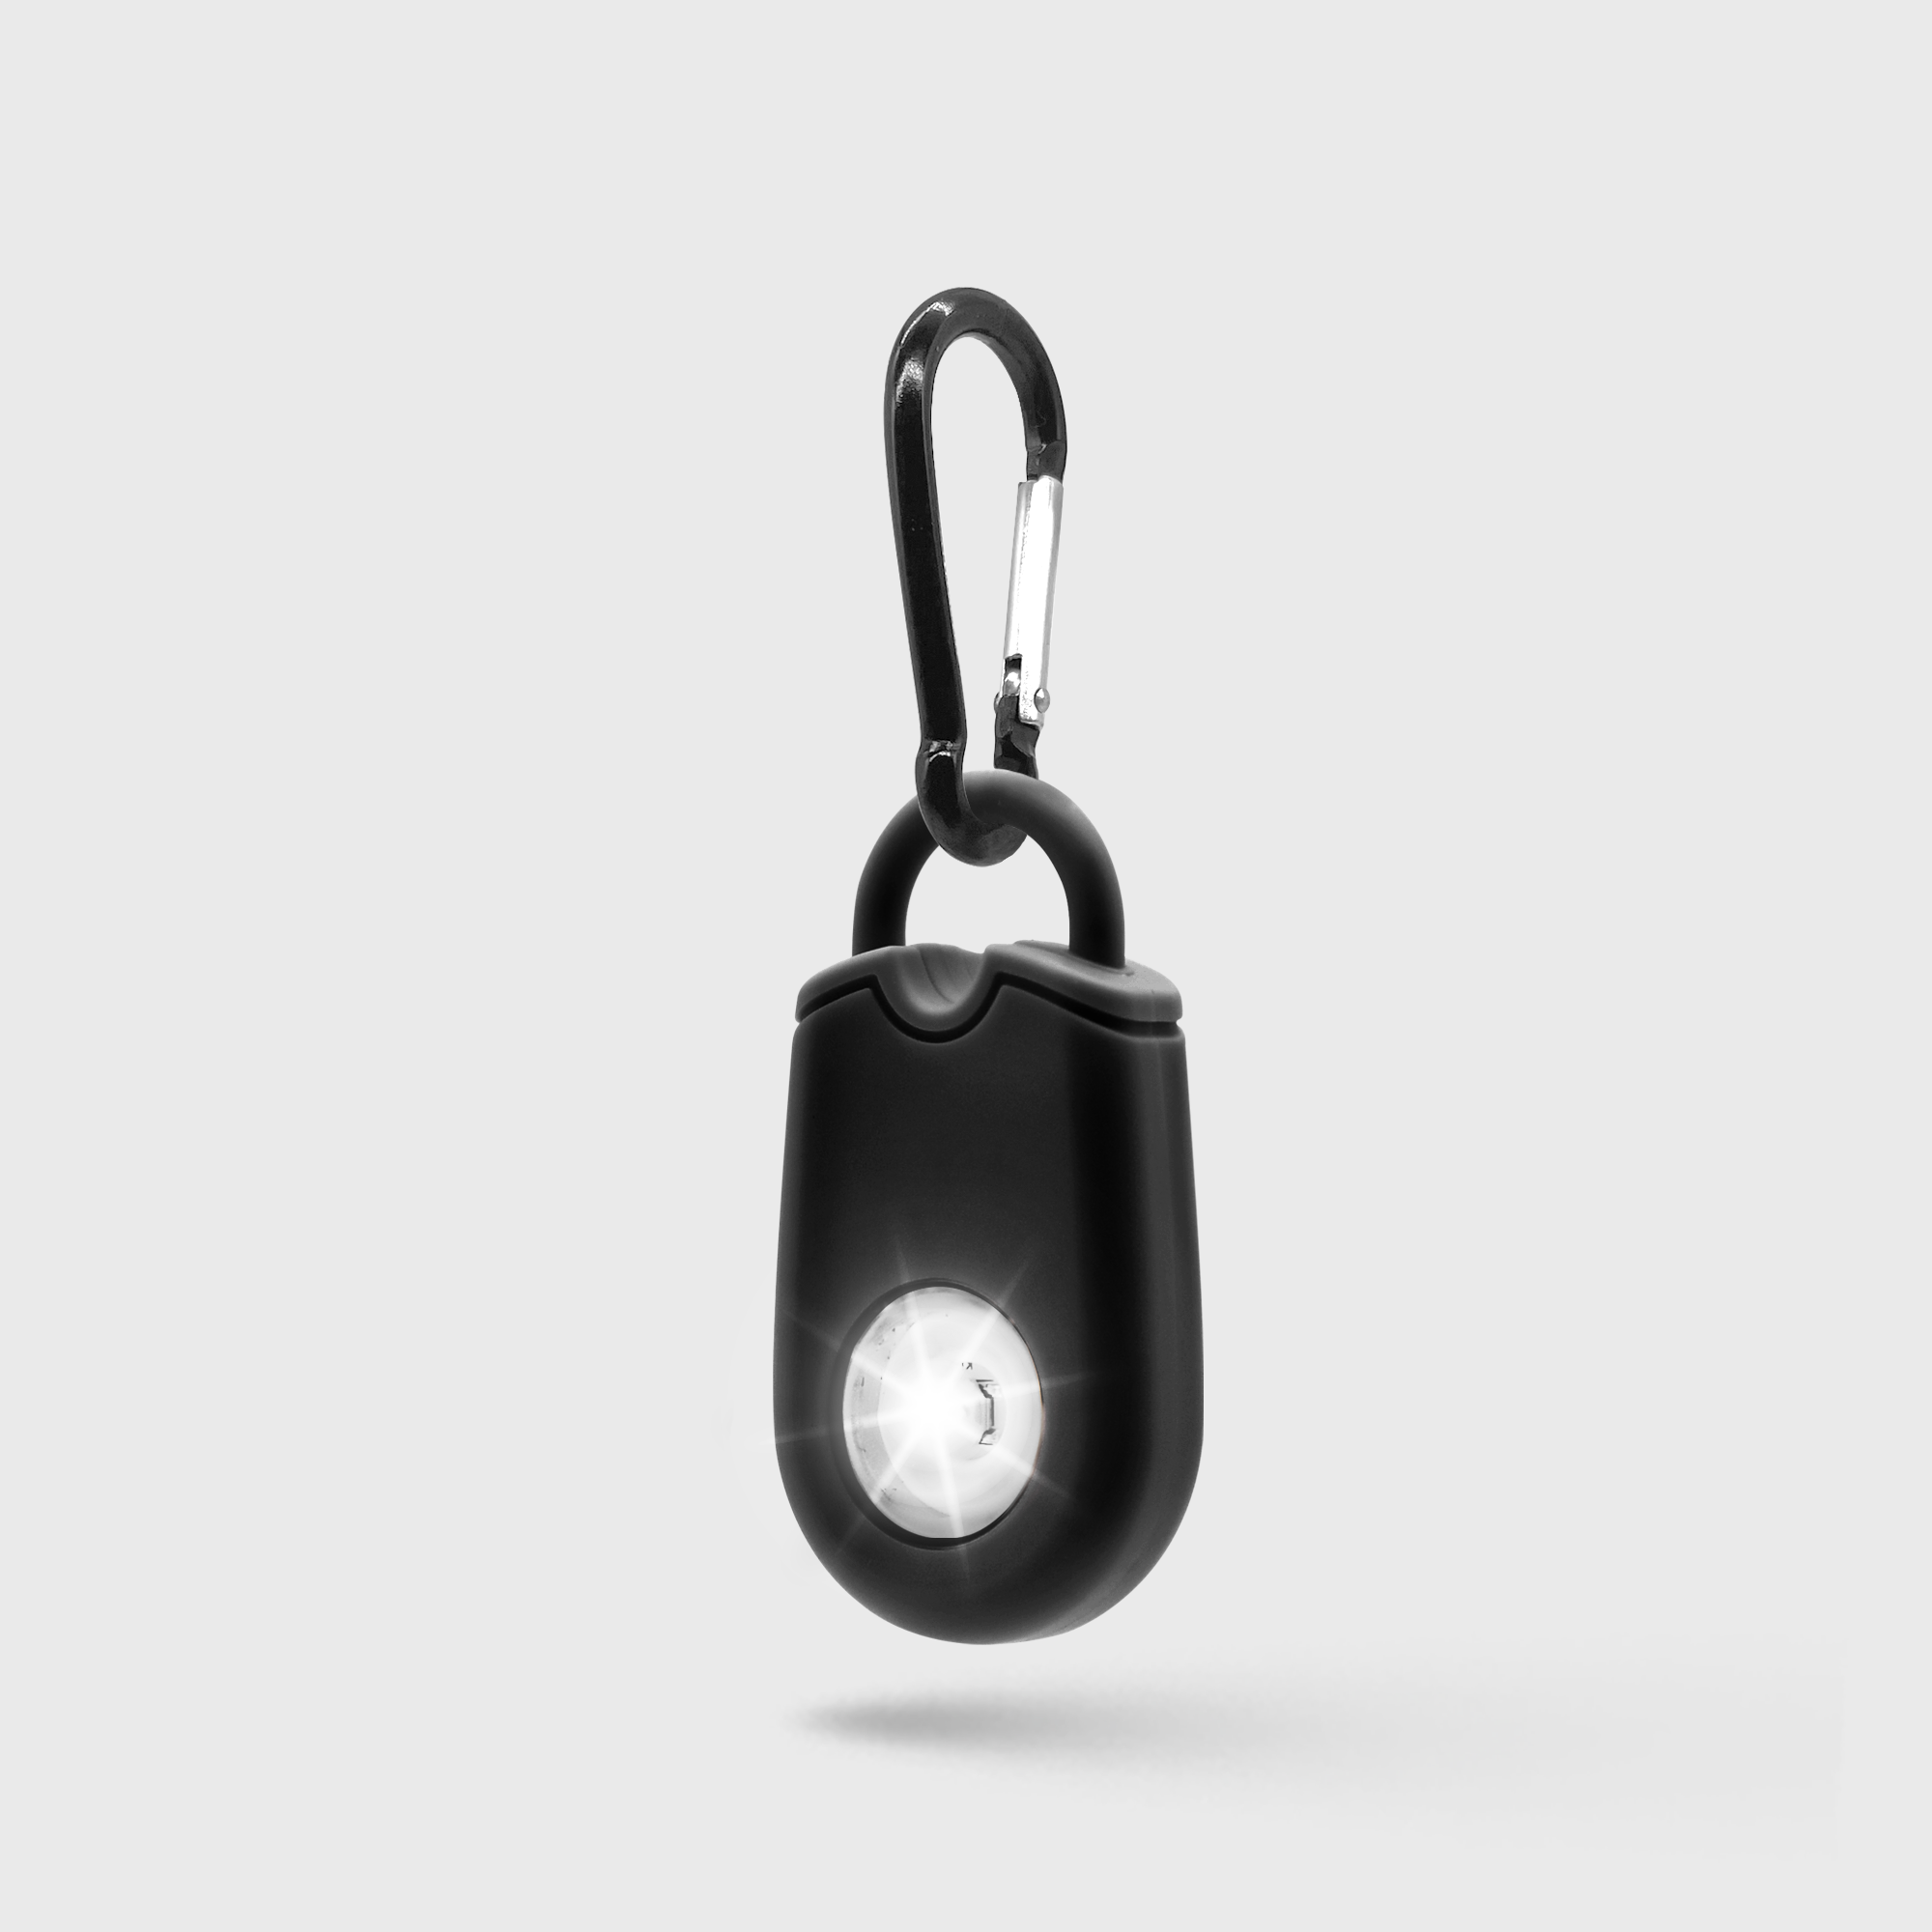 Buy Personal Alarm with Flashlight online | 125 dB w/ Carabiner | Guard Dog  Security